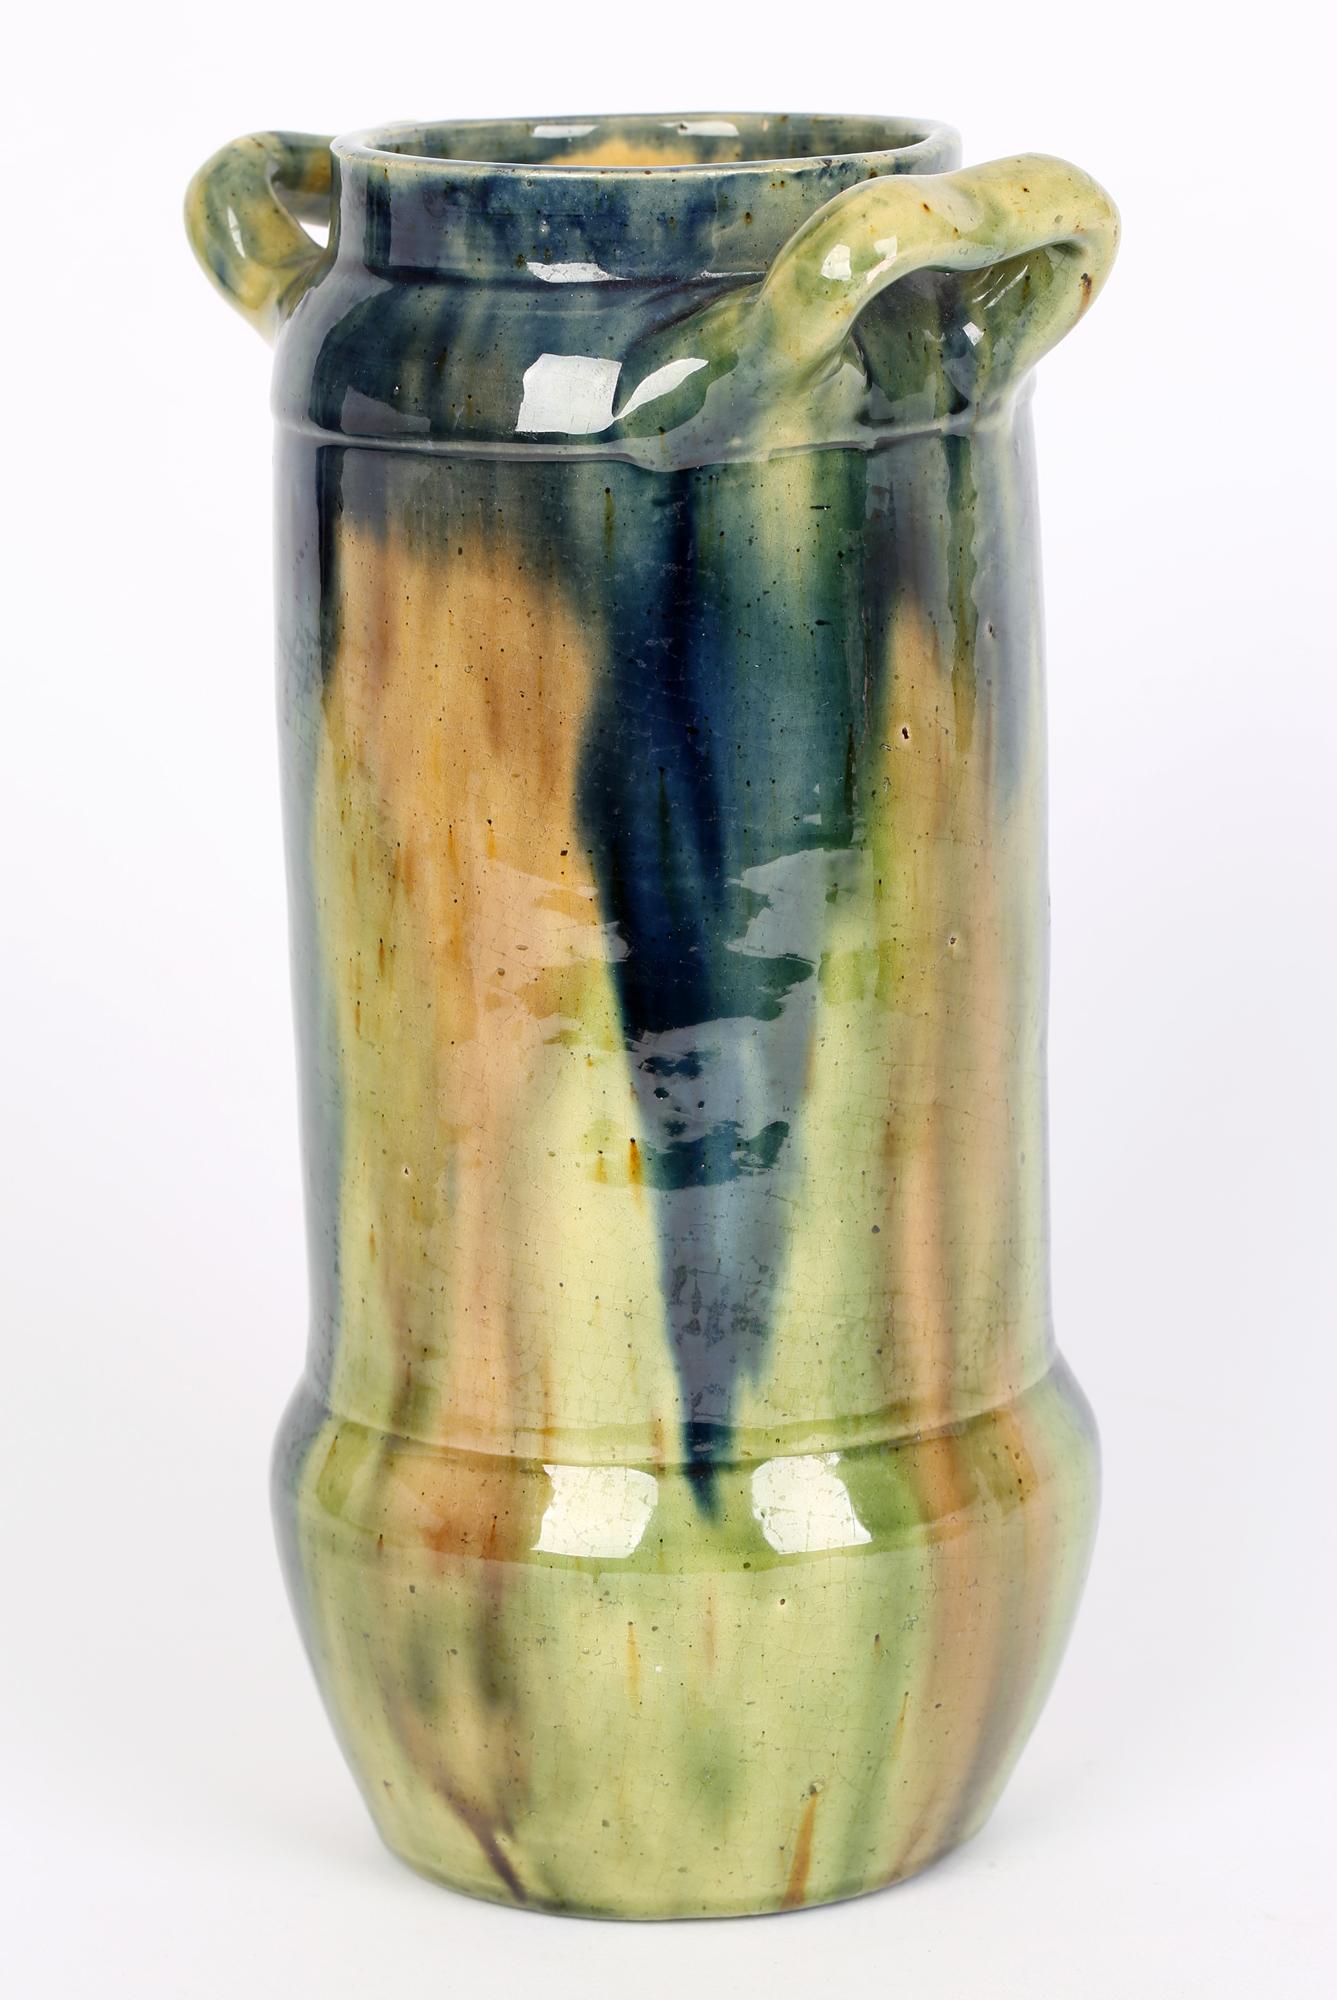 A stylish Belgian Art Nouveau twin handled art pottery vase decorated in streaked glazes dating from around 1900. The earthenware vase is of tall cylindrical shape with a rounded bowl shaped base and flat glazed foot with a rounded shoulder applied